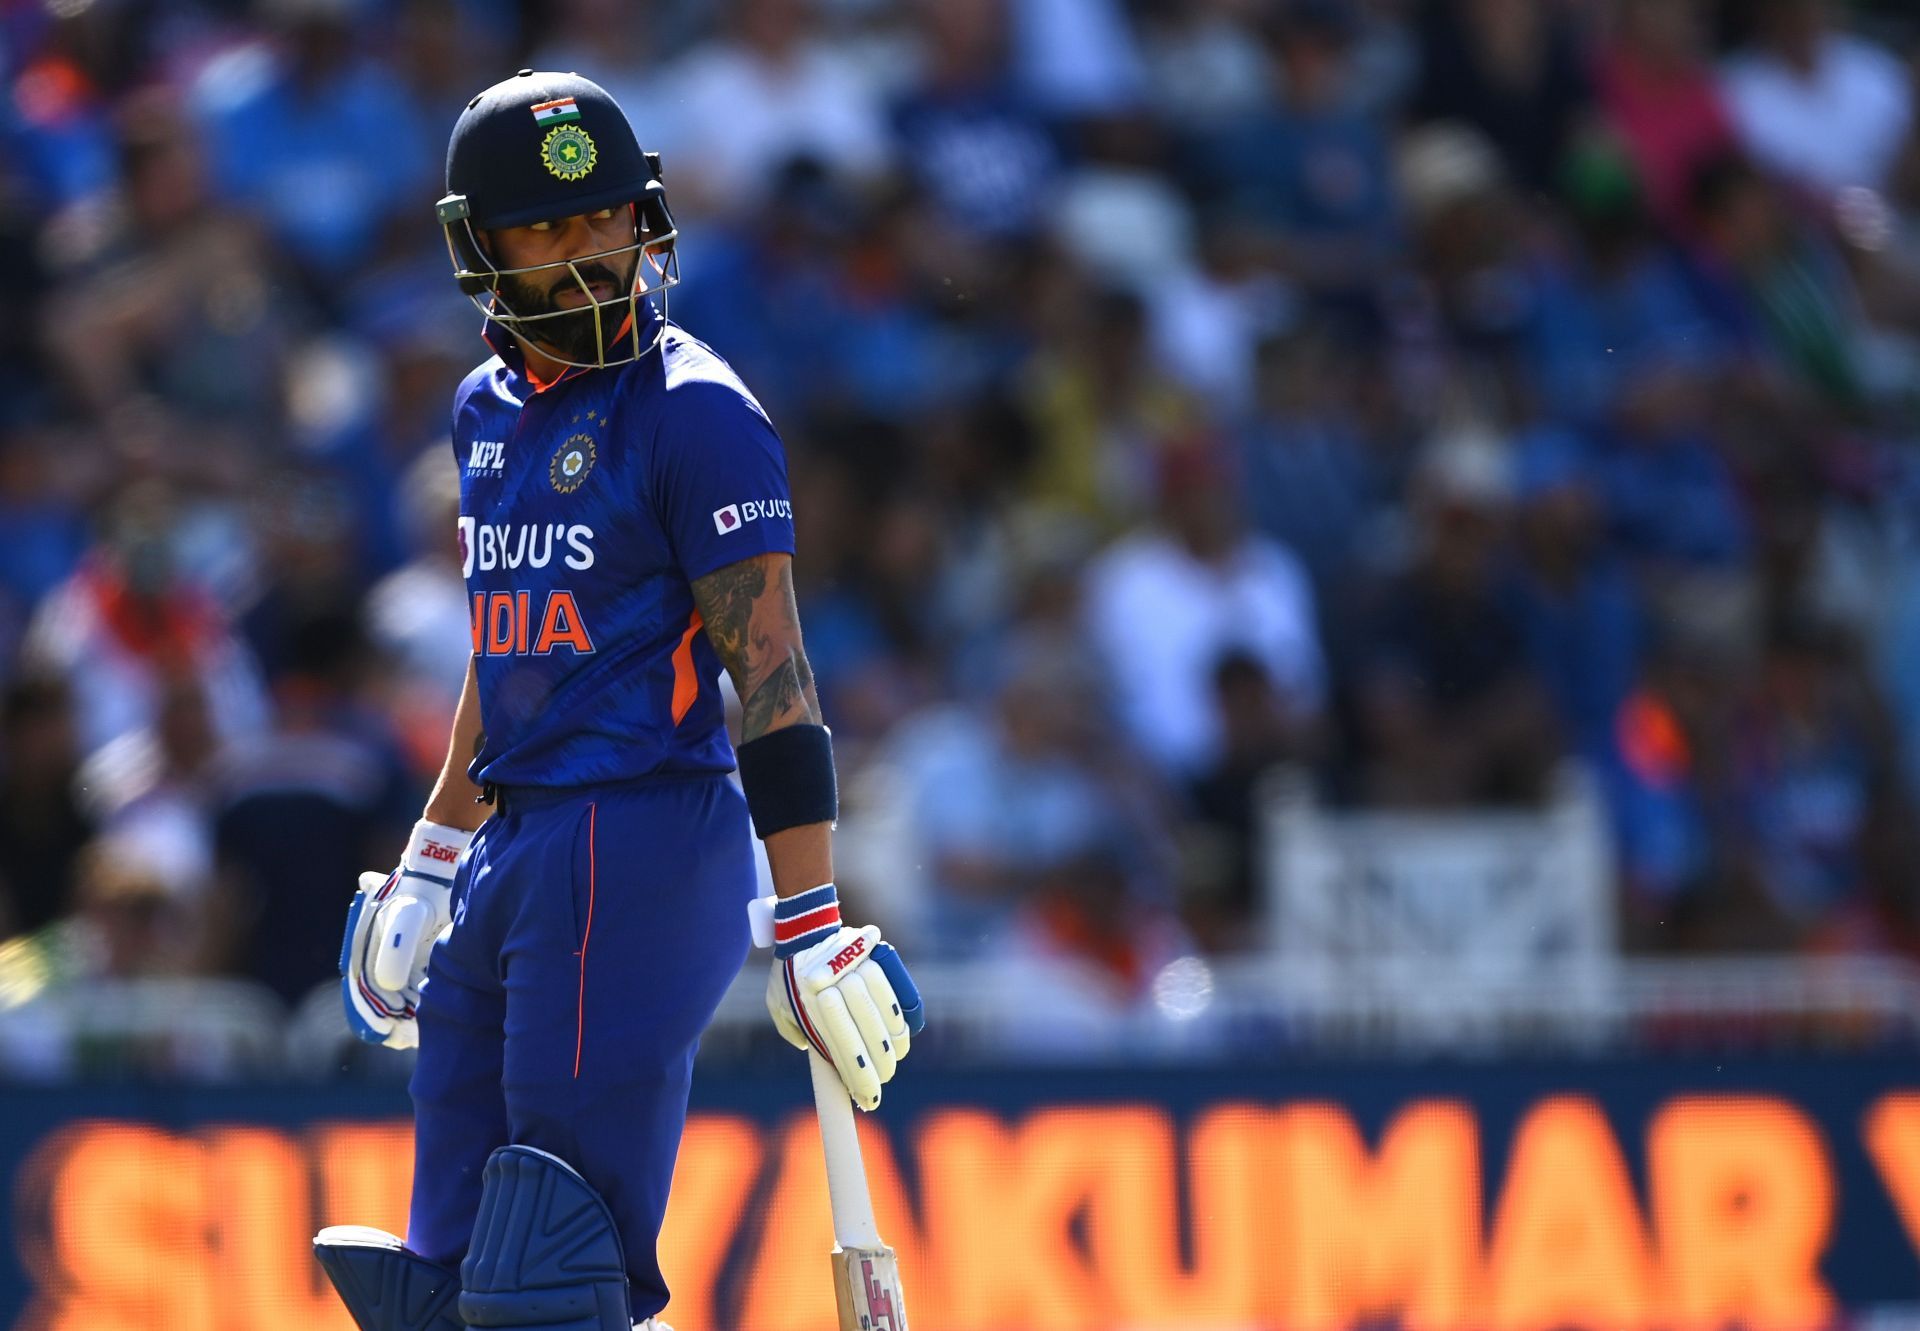 Virat Kohli looks on after being dismissed during the 3rd T20I. Pic: Getty Images